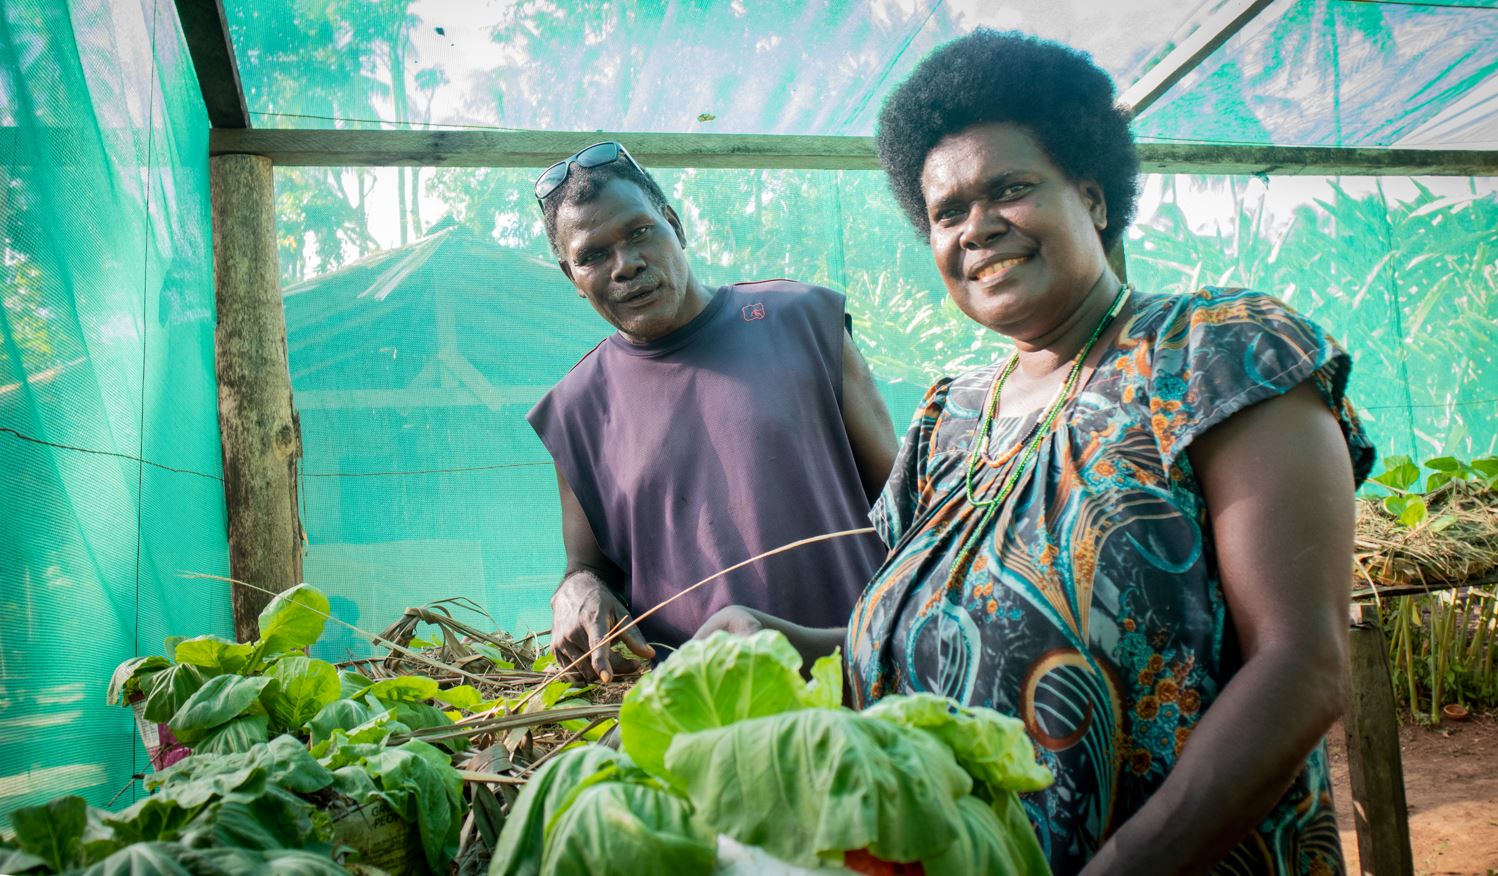 Bougainville farmers Martin and Celestine Masen, showing off their fresh produce. The husband and wife team have undergone the Family Farm Teams training as part of the Bougainville cocoa value chain project. The training is both improving livelihoods for farming families and addressing gender inequalities. It is also flexible enough to be applied across diverse crops, commodities and communities.